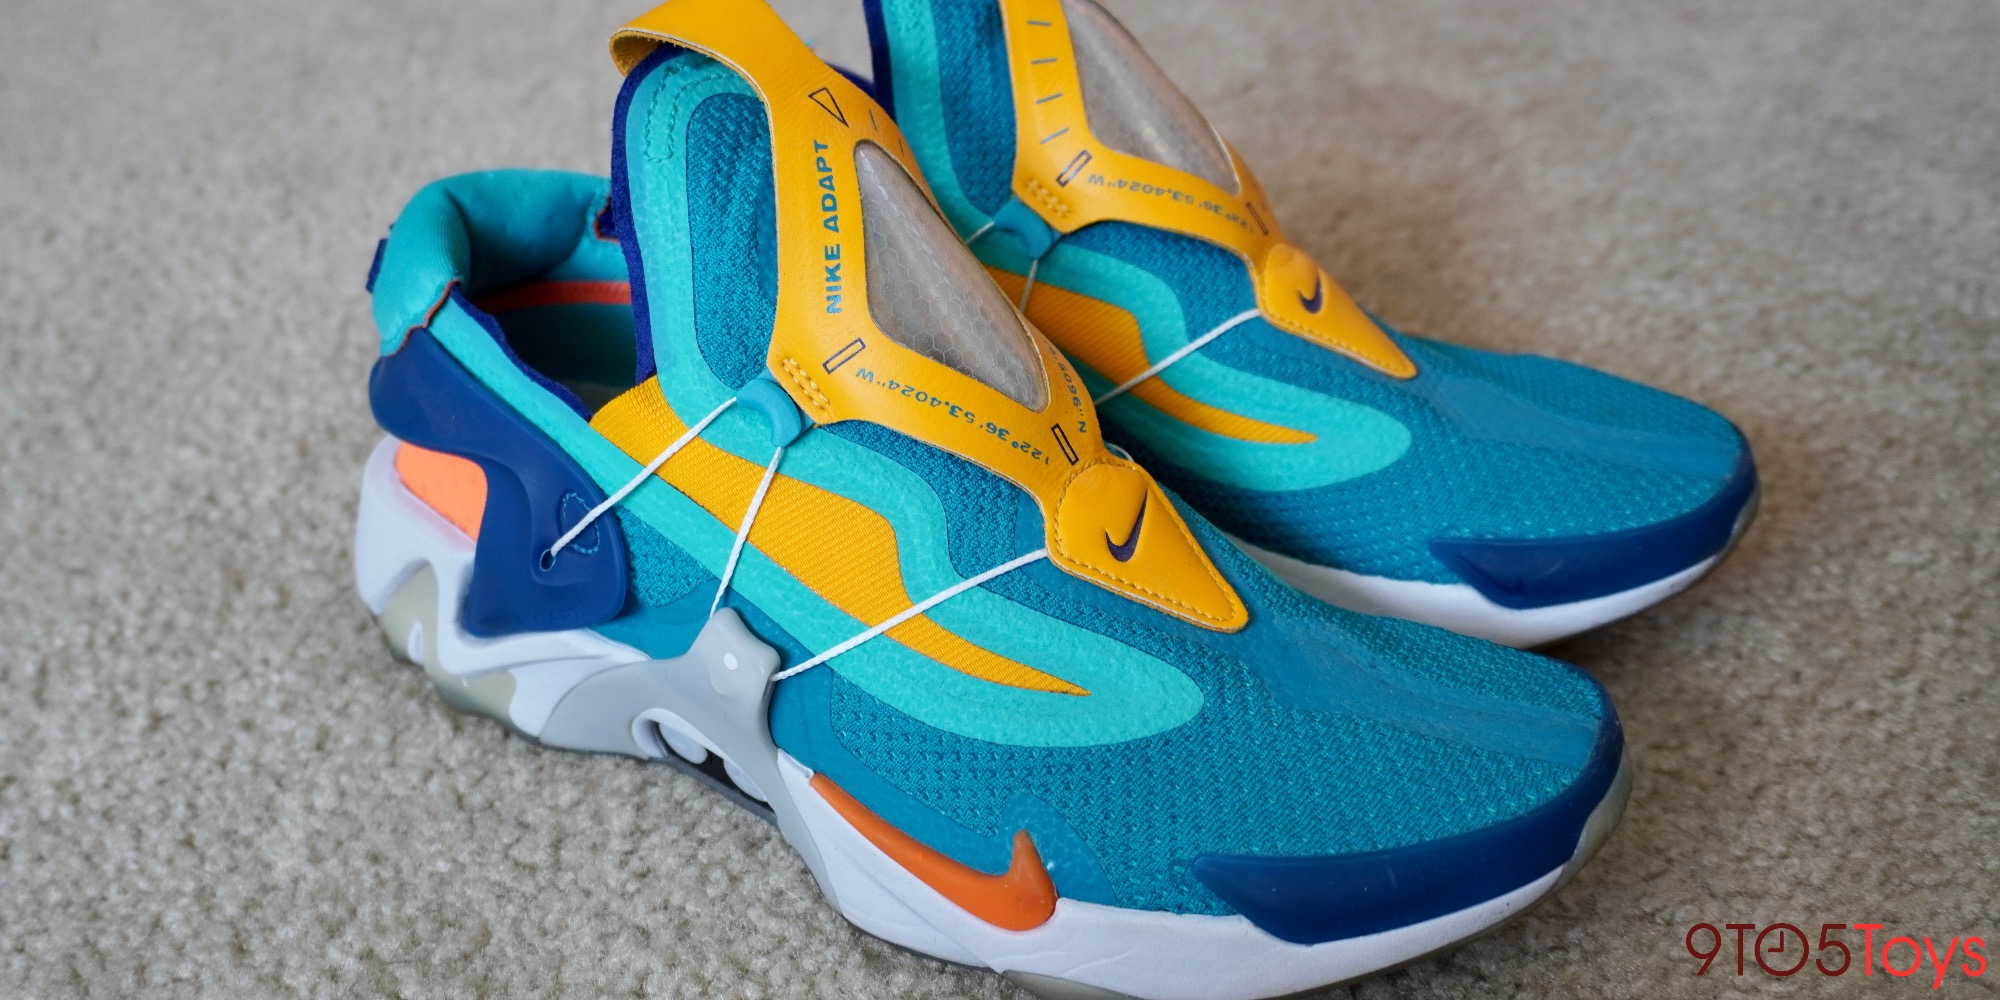 Nike sneakers review: Futuristic footwear, - 9to5Toys